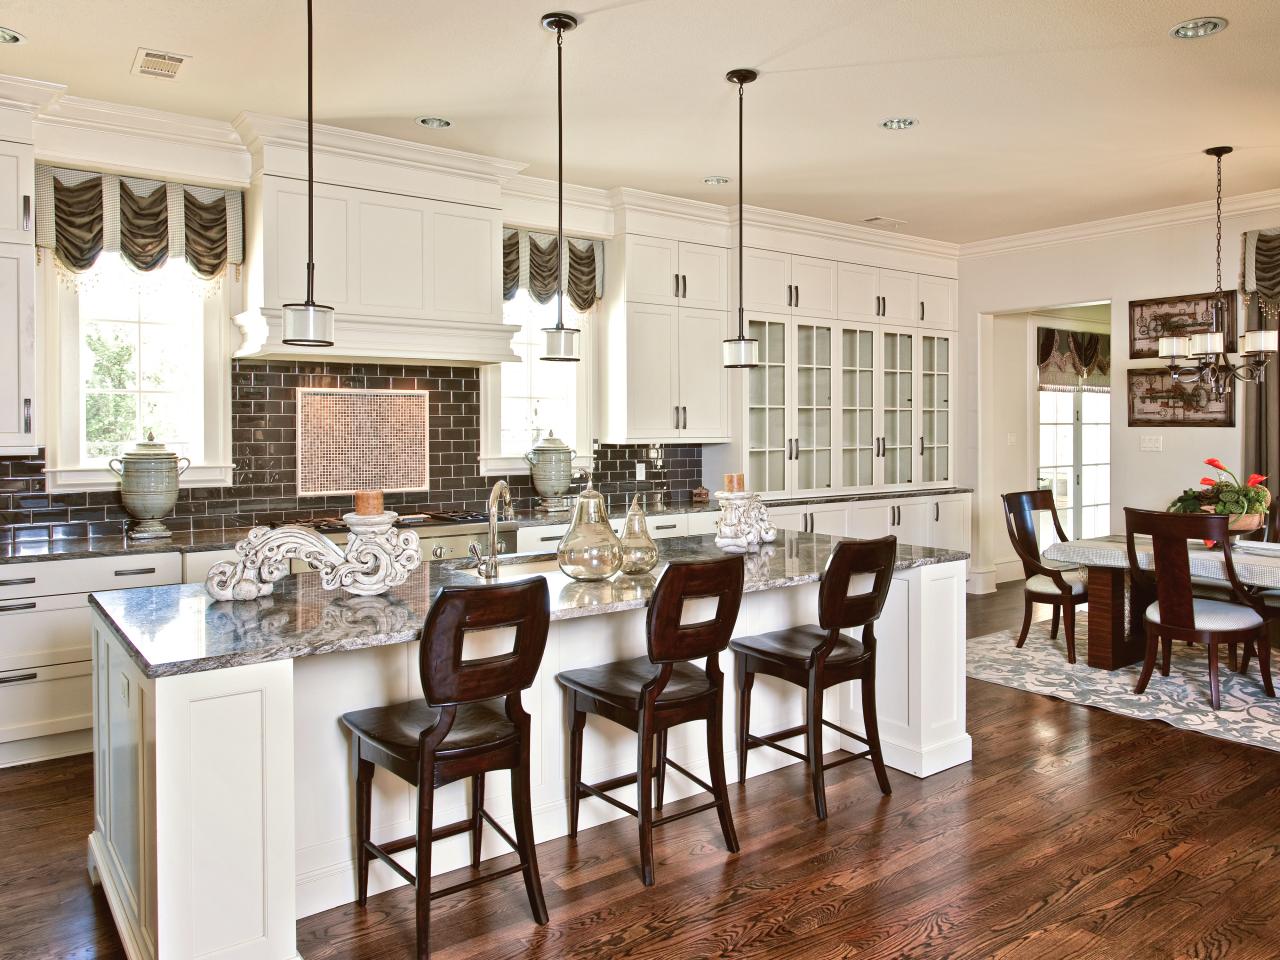 Kitchen Bar Stool Chair Options, How To Choose Kitchen Bar Stools